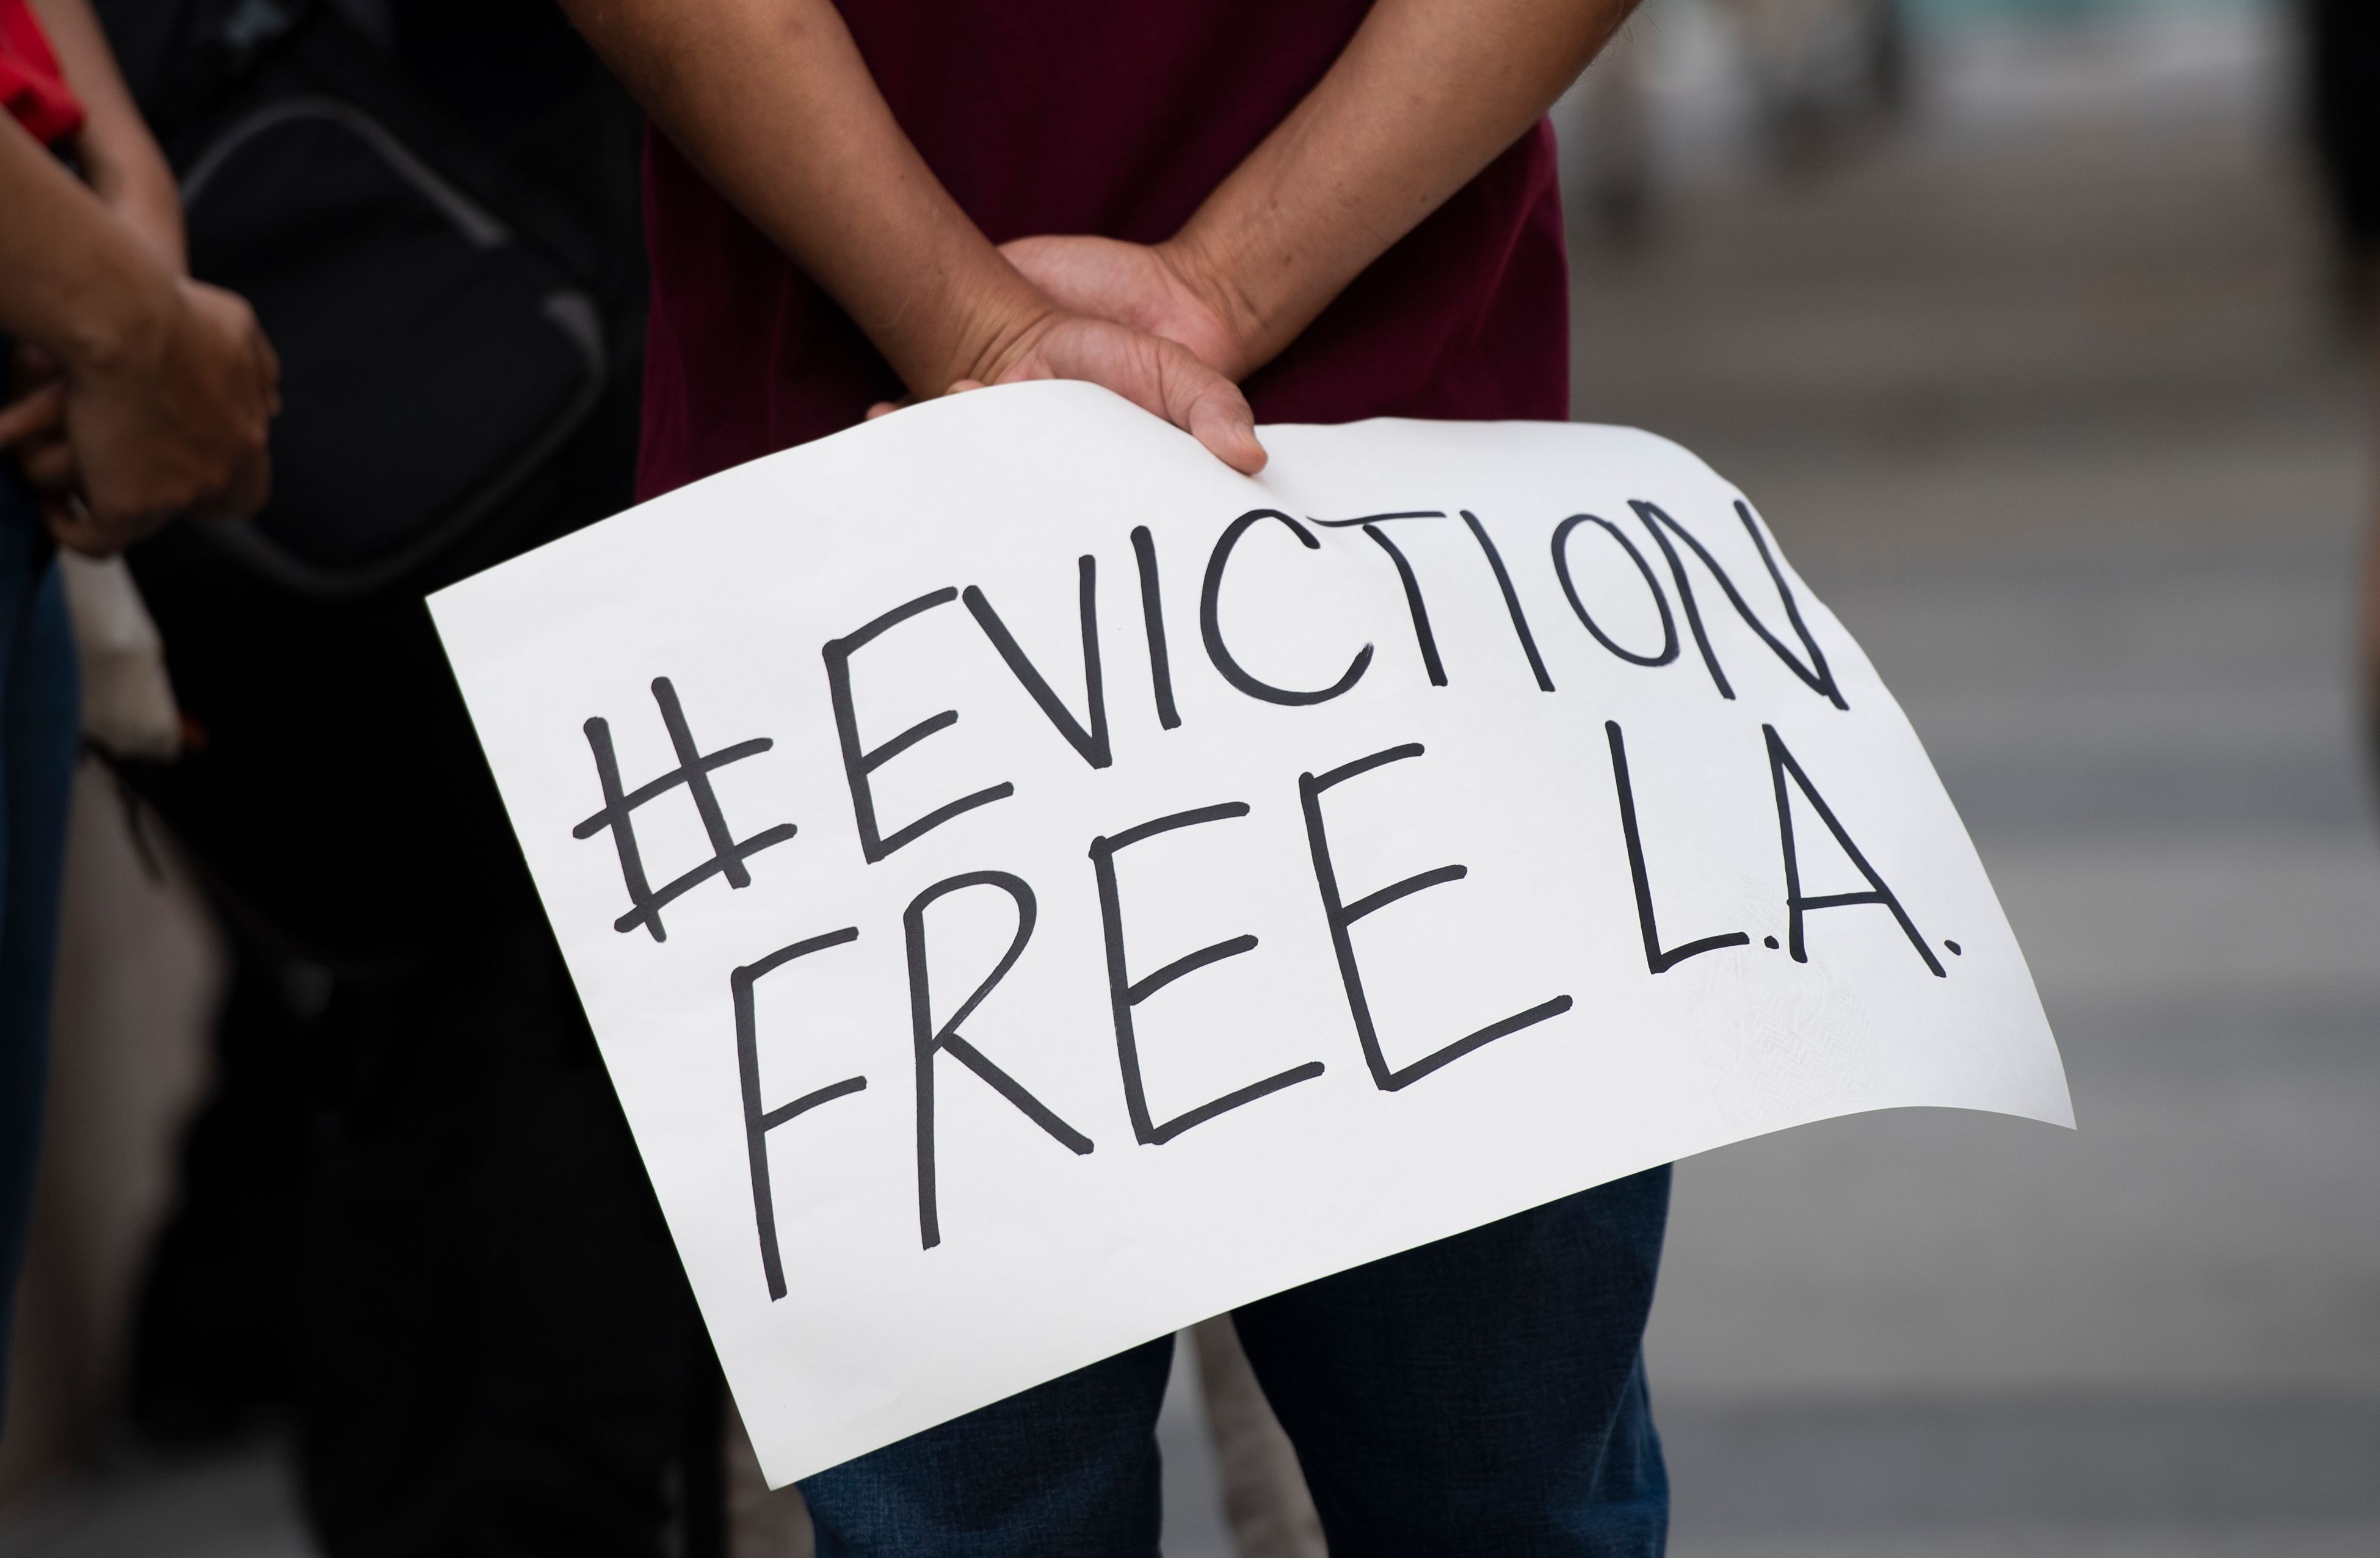 La Launches 10m Fund To Help Tenants Fighting Eviction Cbs Los Angeles